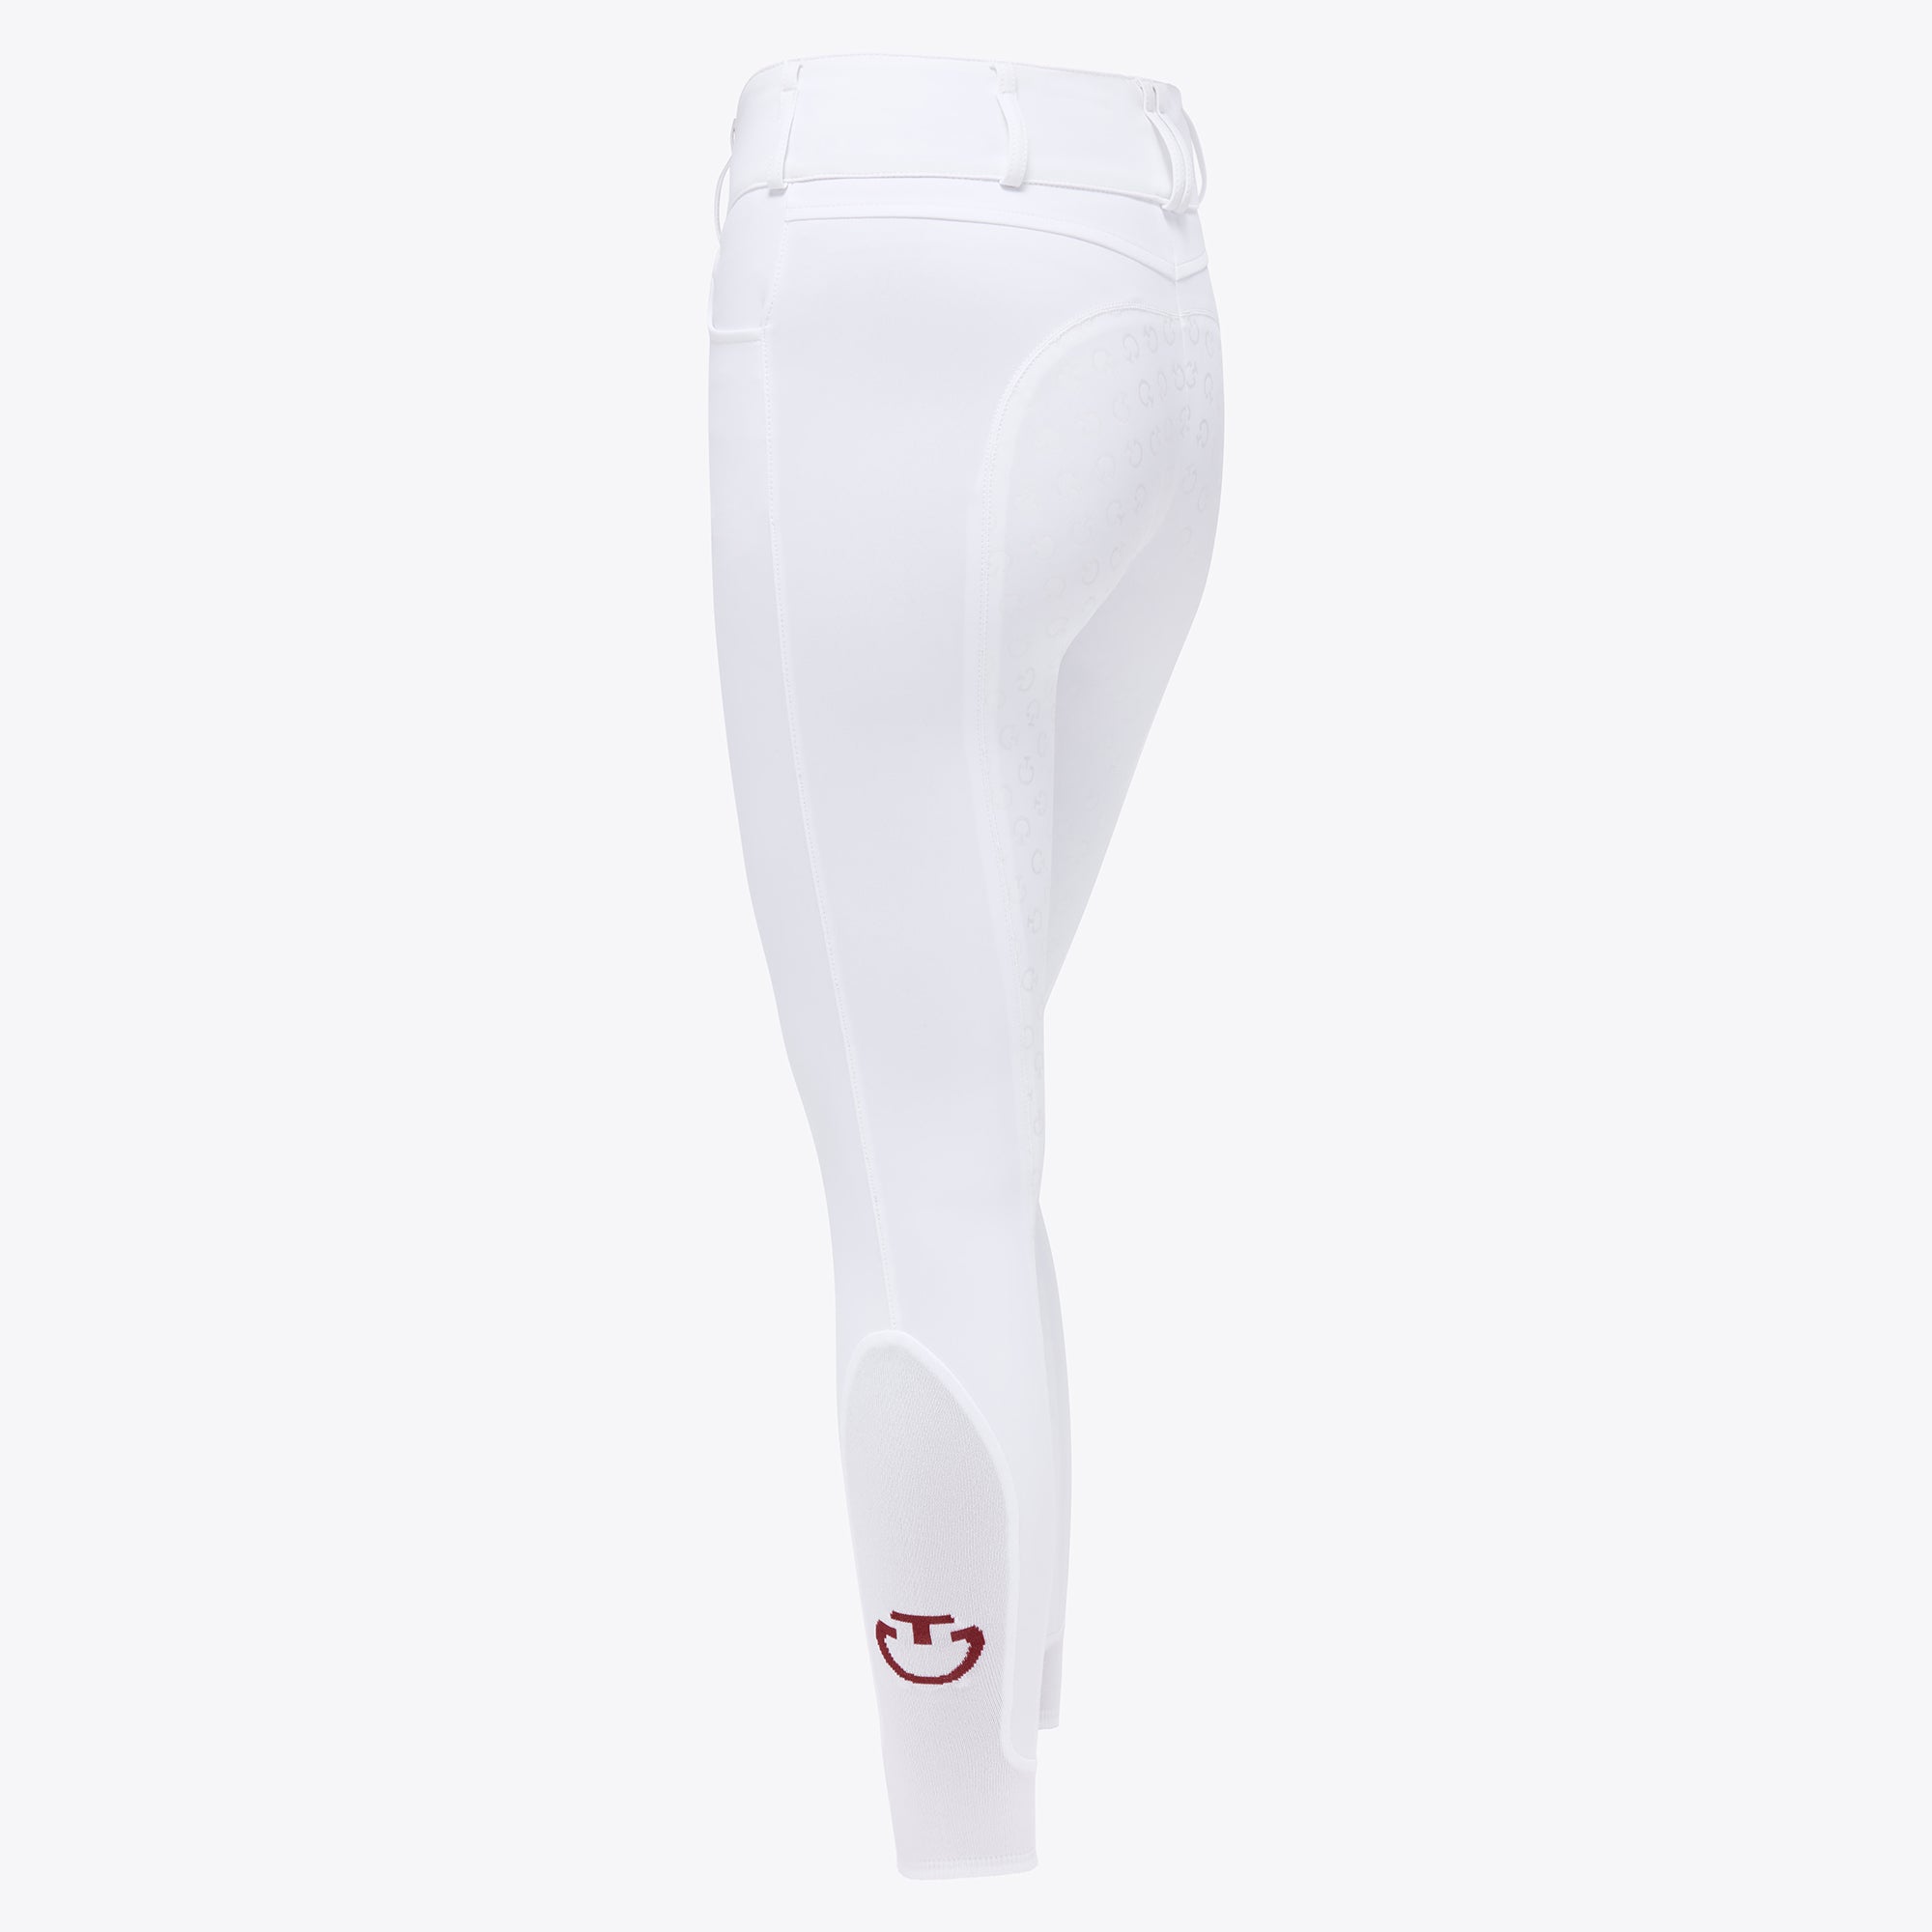 Ladies High Rise Silicone Full Seat Breeches - White (LAST ONE - IT42 - UK10 - FR36)